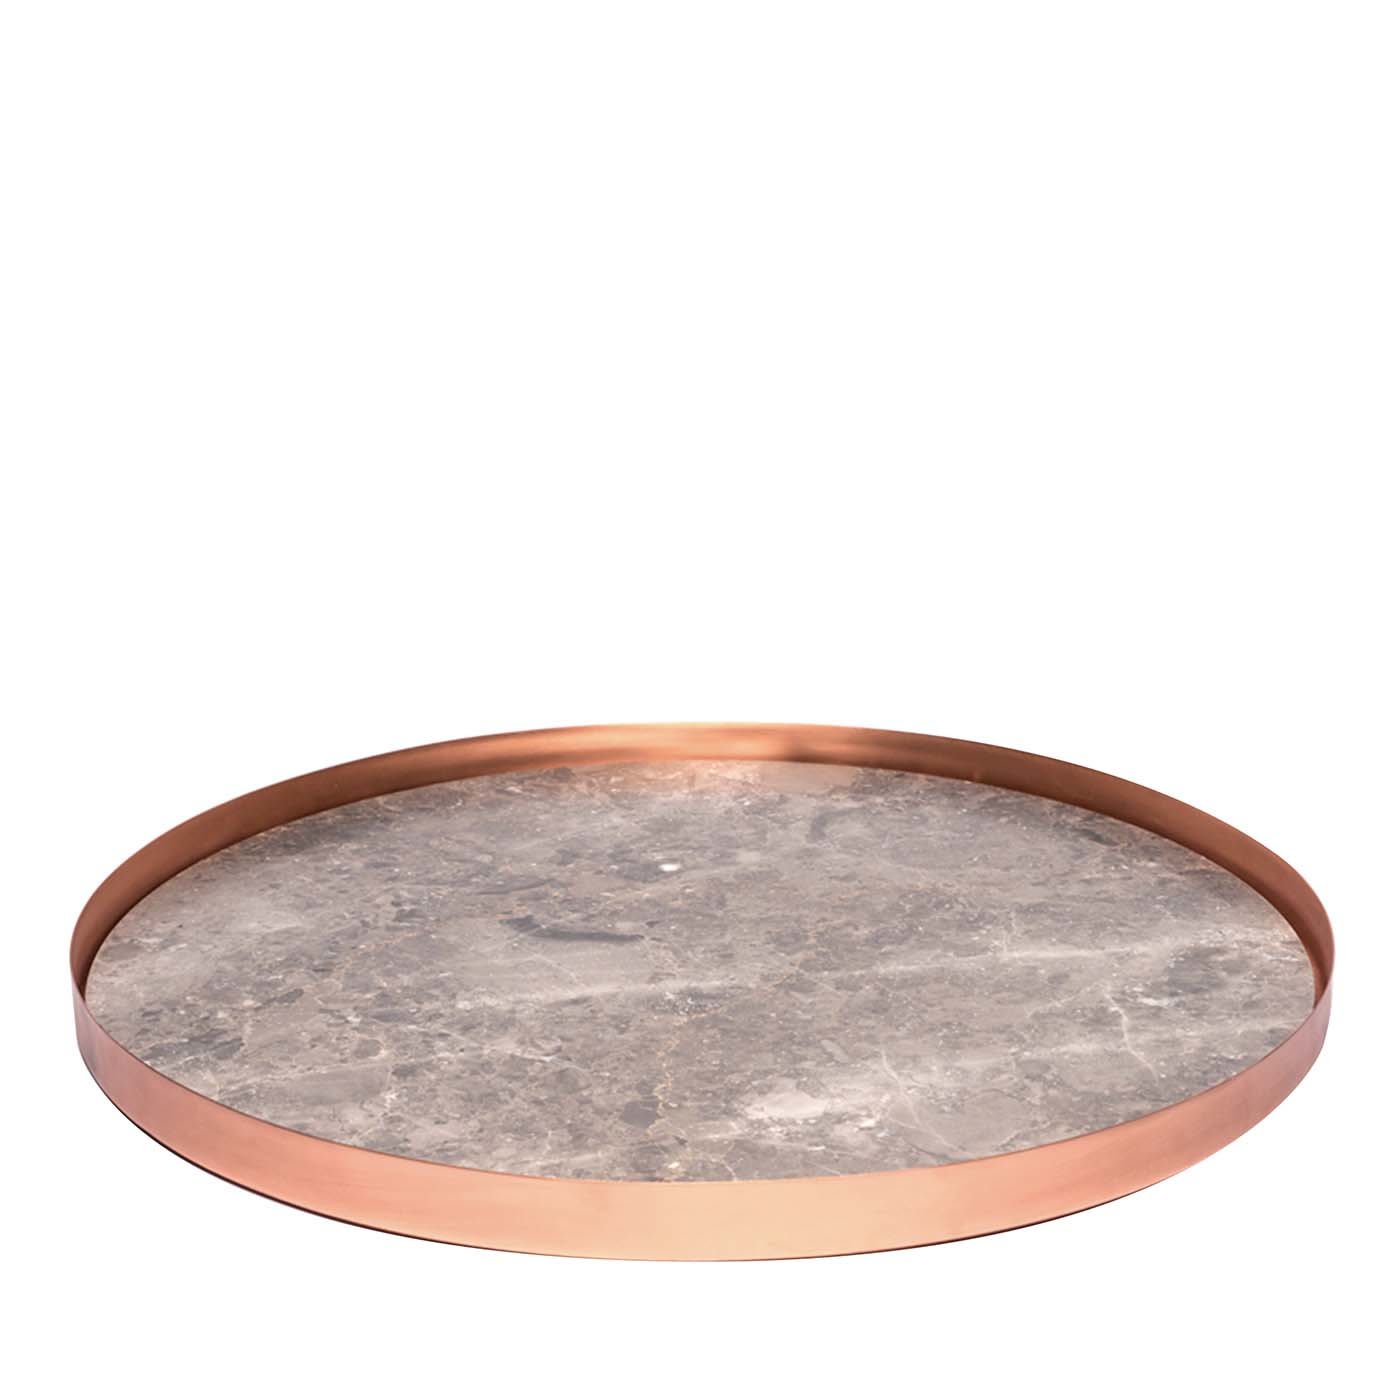 Full Moon Large Tray with Marble Base by Elisa Ossino - Paola C